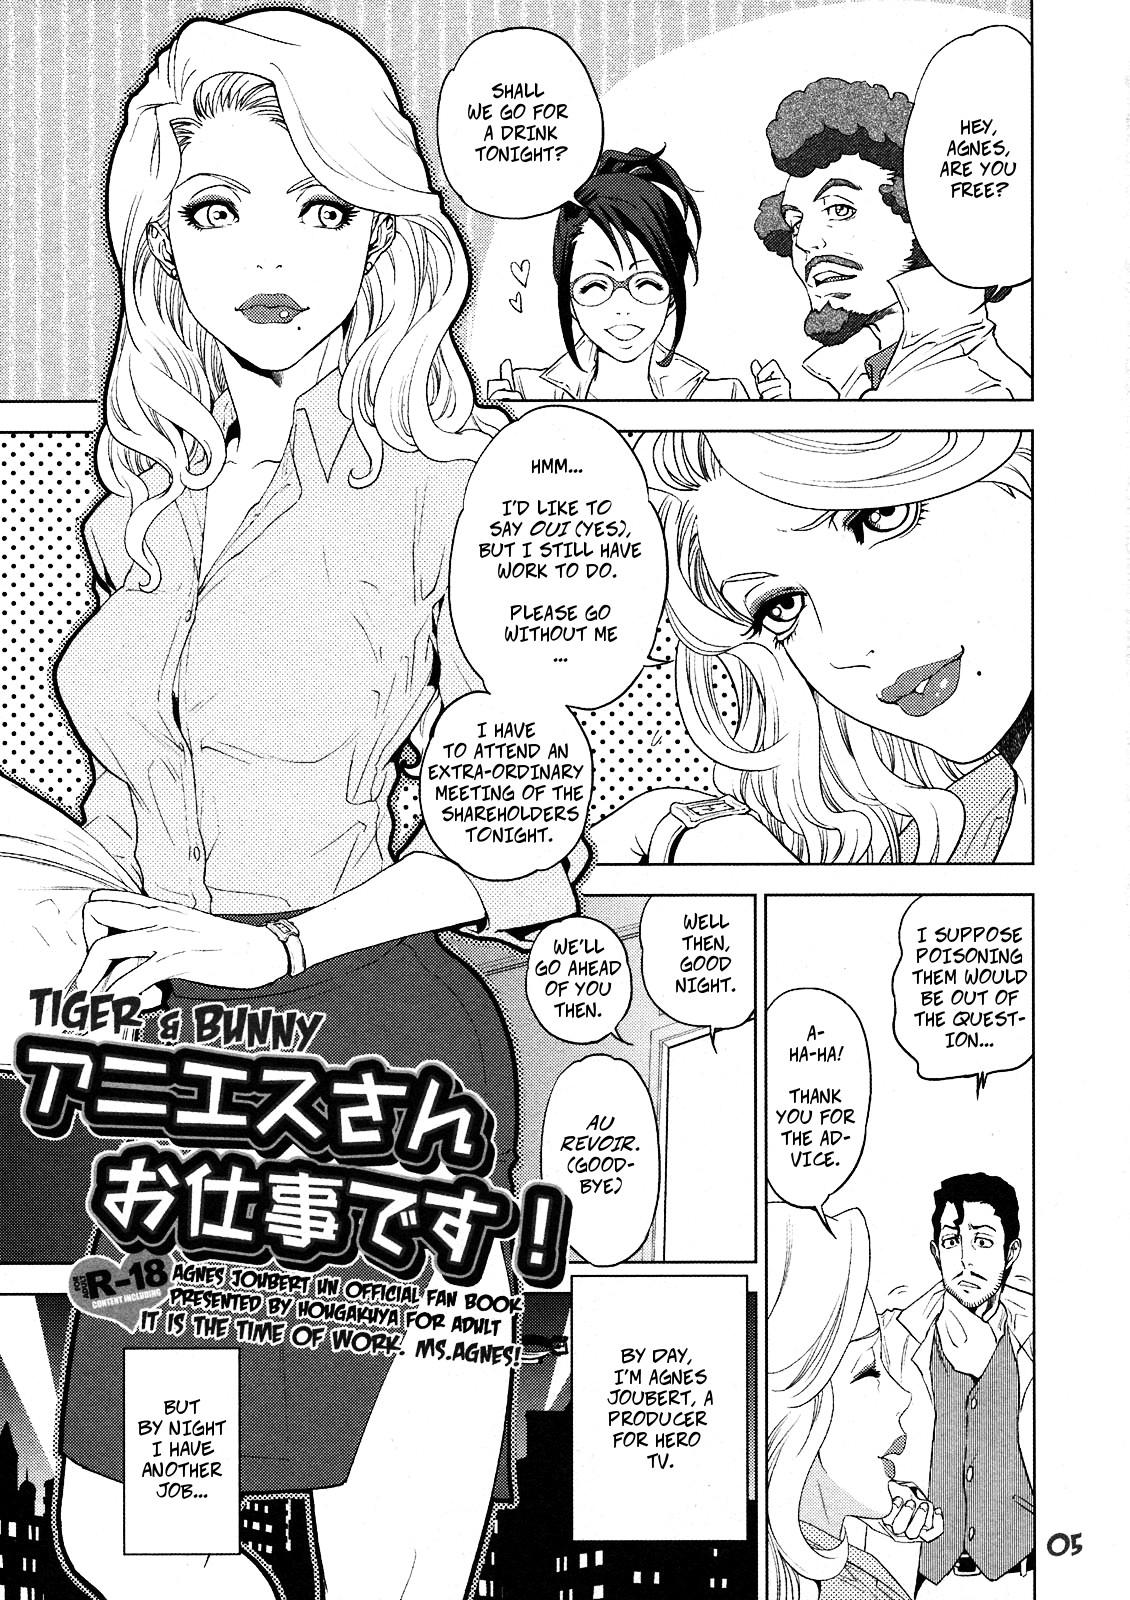 Jacking Agnes-san Oshigoto desu! | It's Time For Work, Ms. Agnes! - Tiger and bunny Gay Cumshots - Page 5